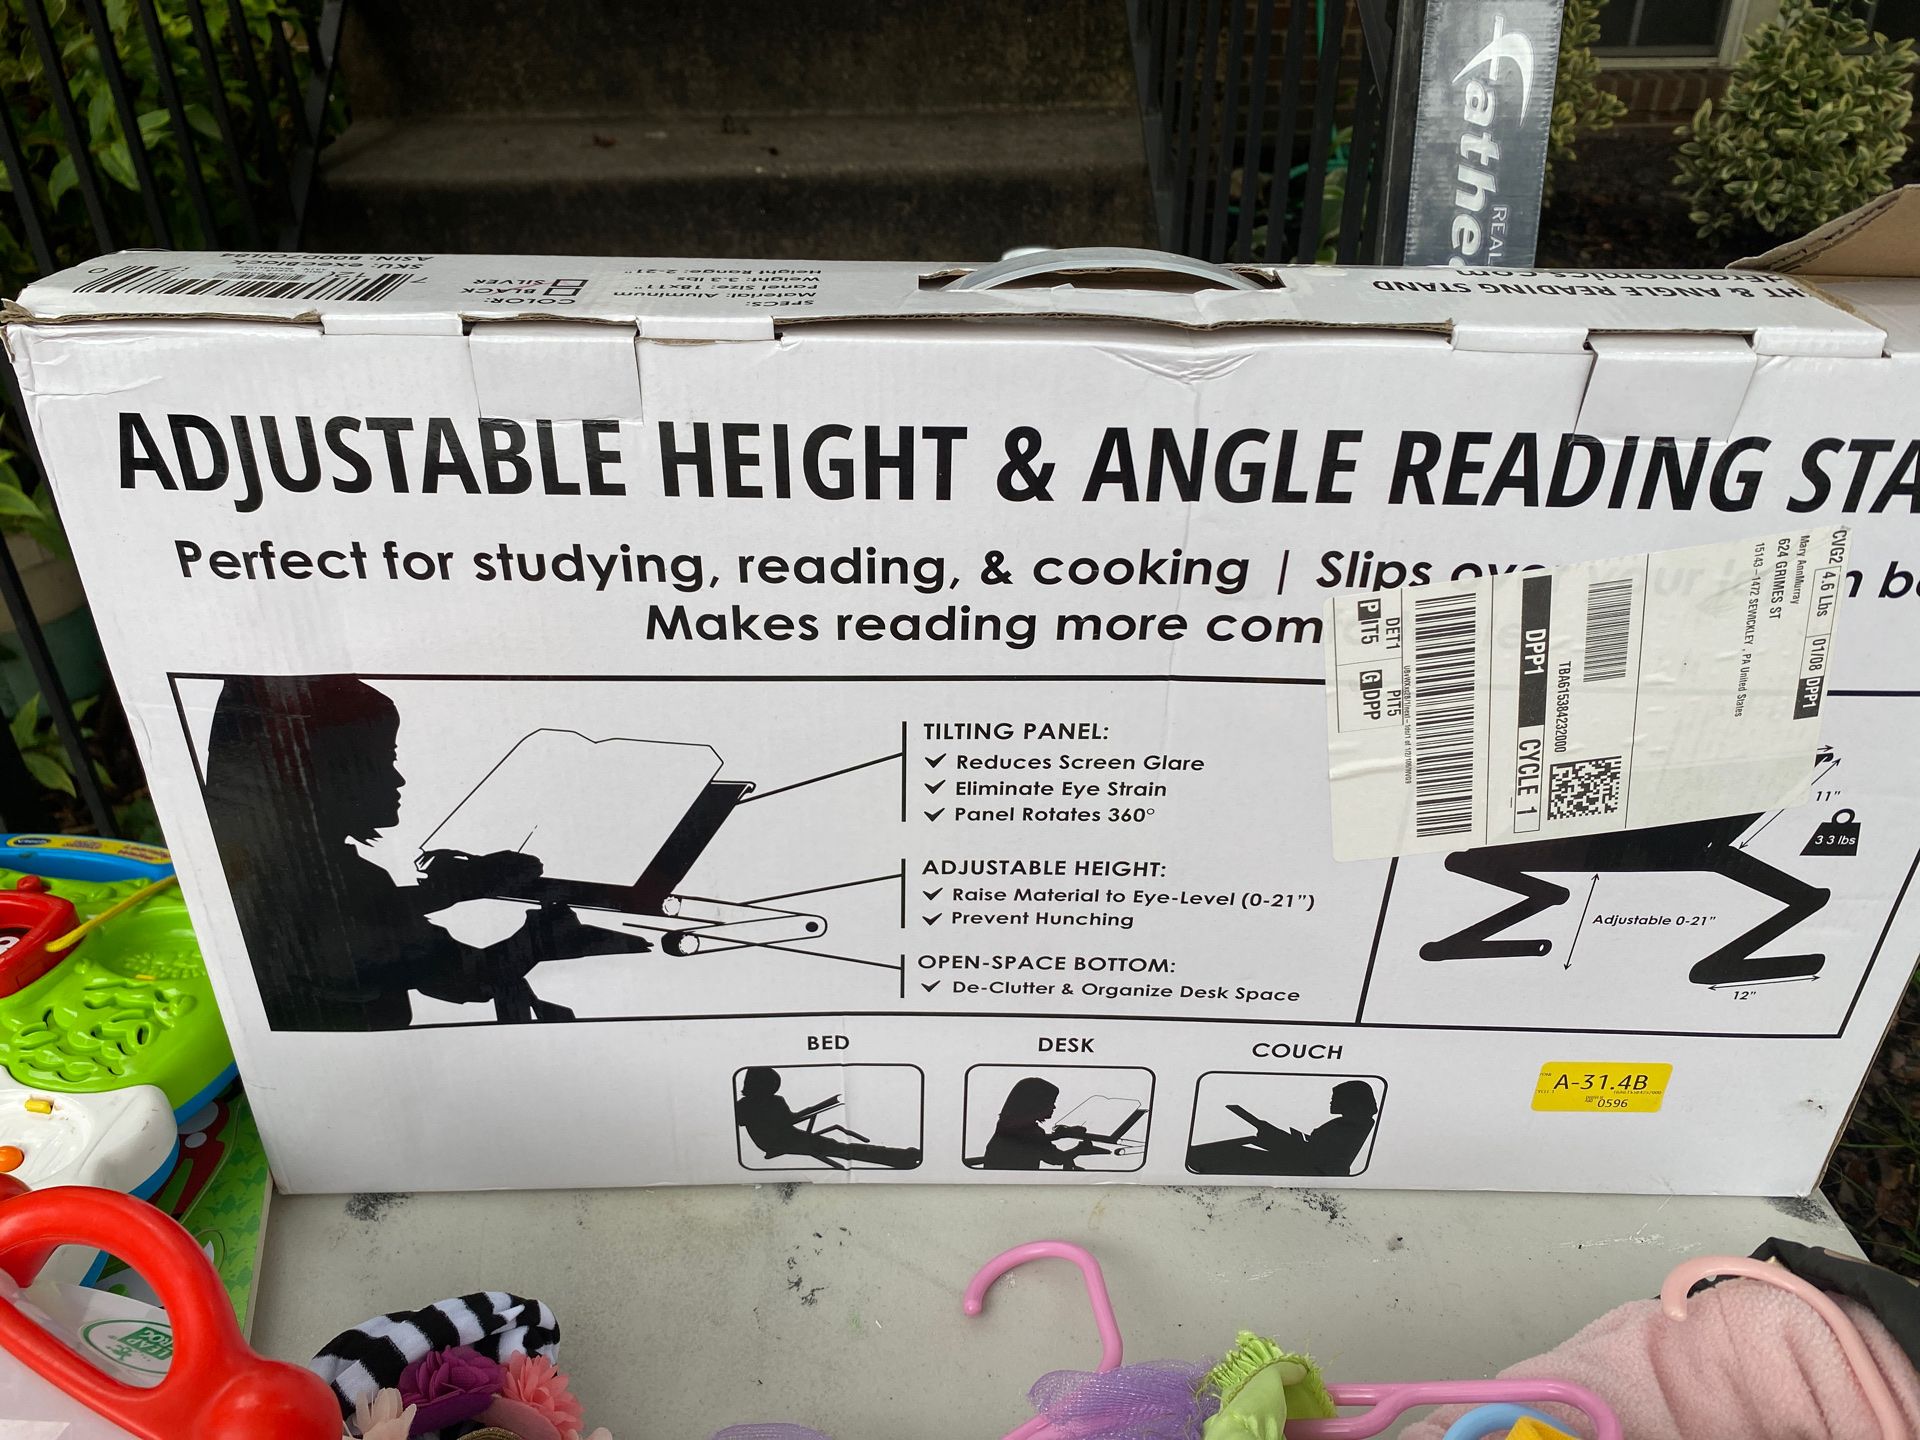 Adjustable height & angle reading stand